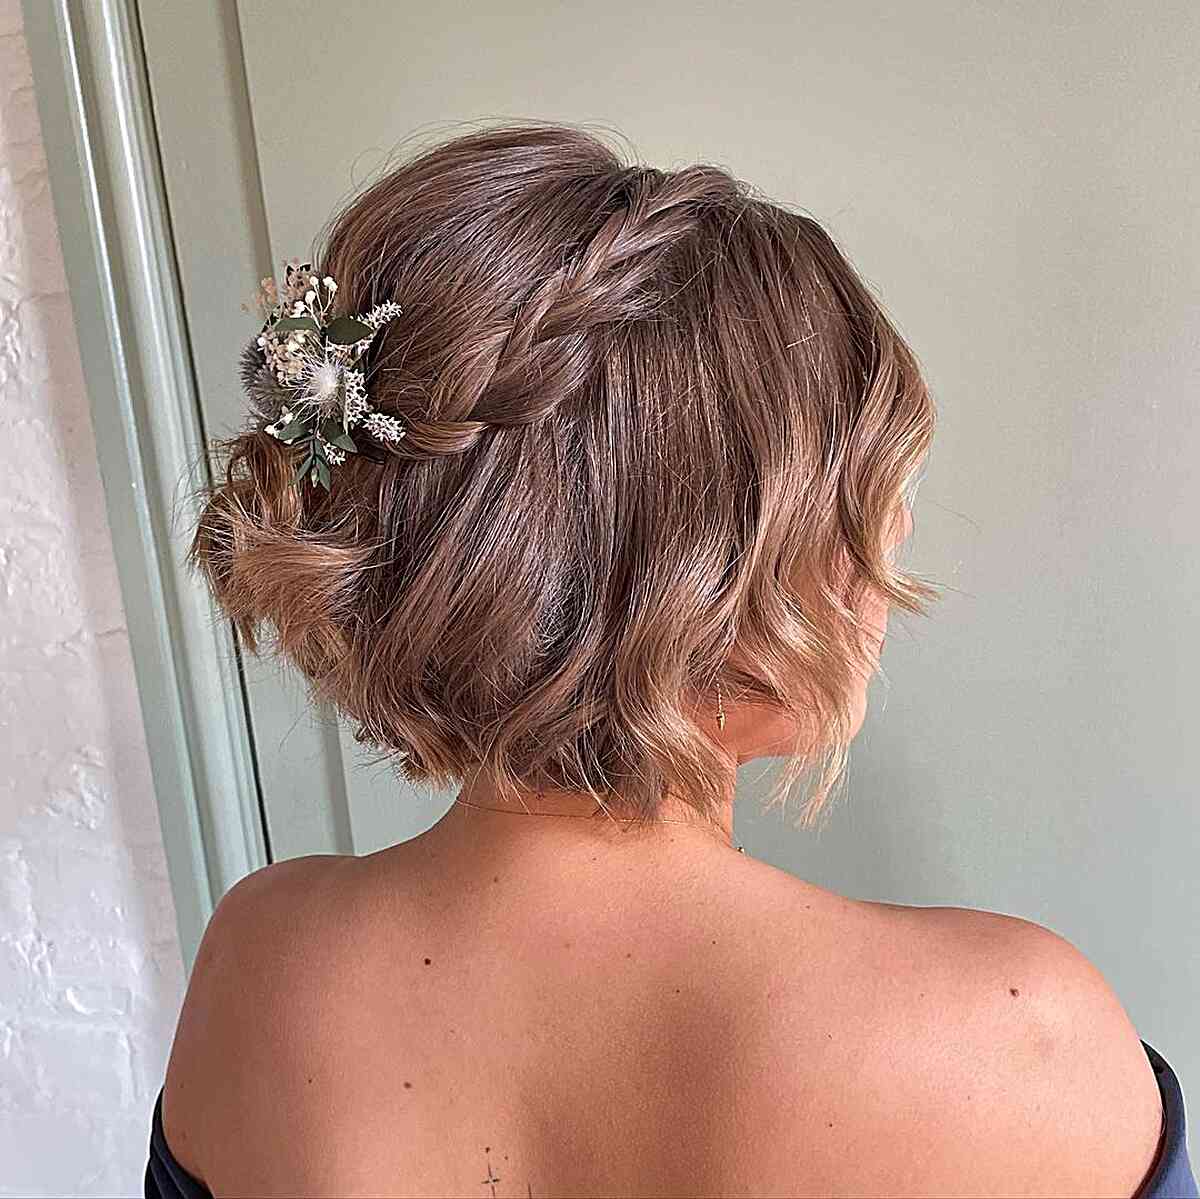 Short and Stunning Wedding Hair with a Braid